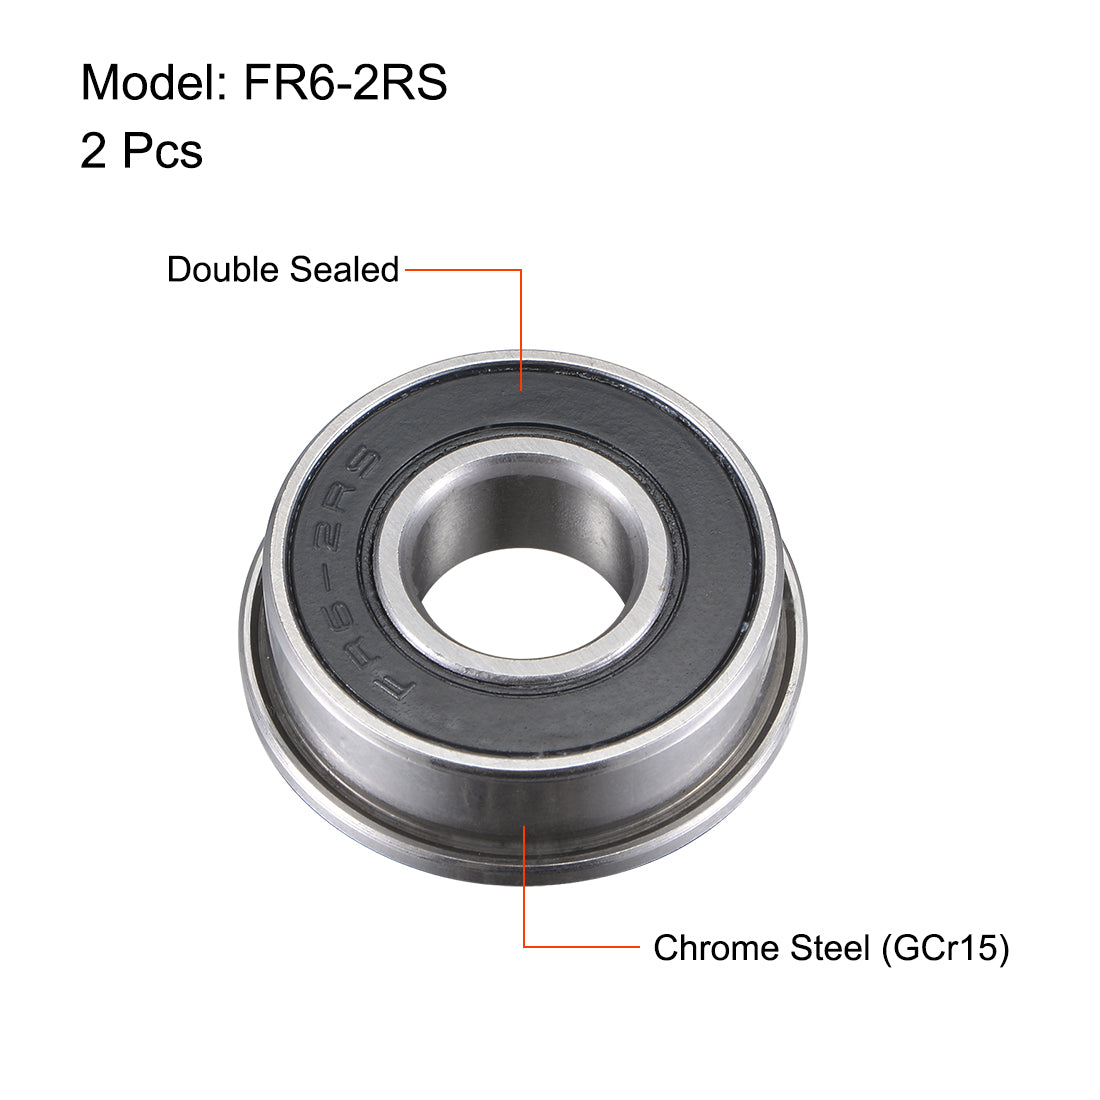 uxcell Uxcell FR6-2RS Flange Ball Bearing 3/8"x 7/8"x 9/32" Sealed Chrome Steel Miniature Ball Bearings 2pcs